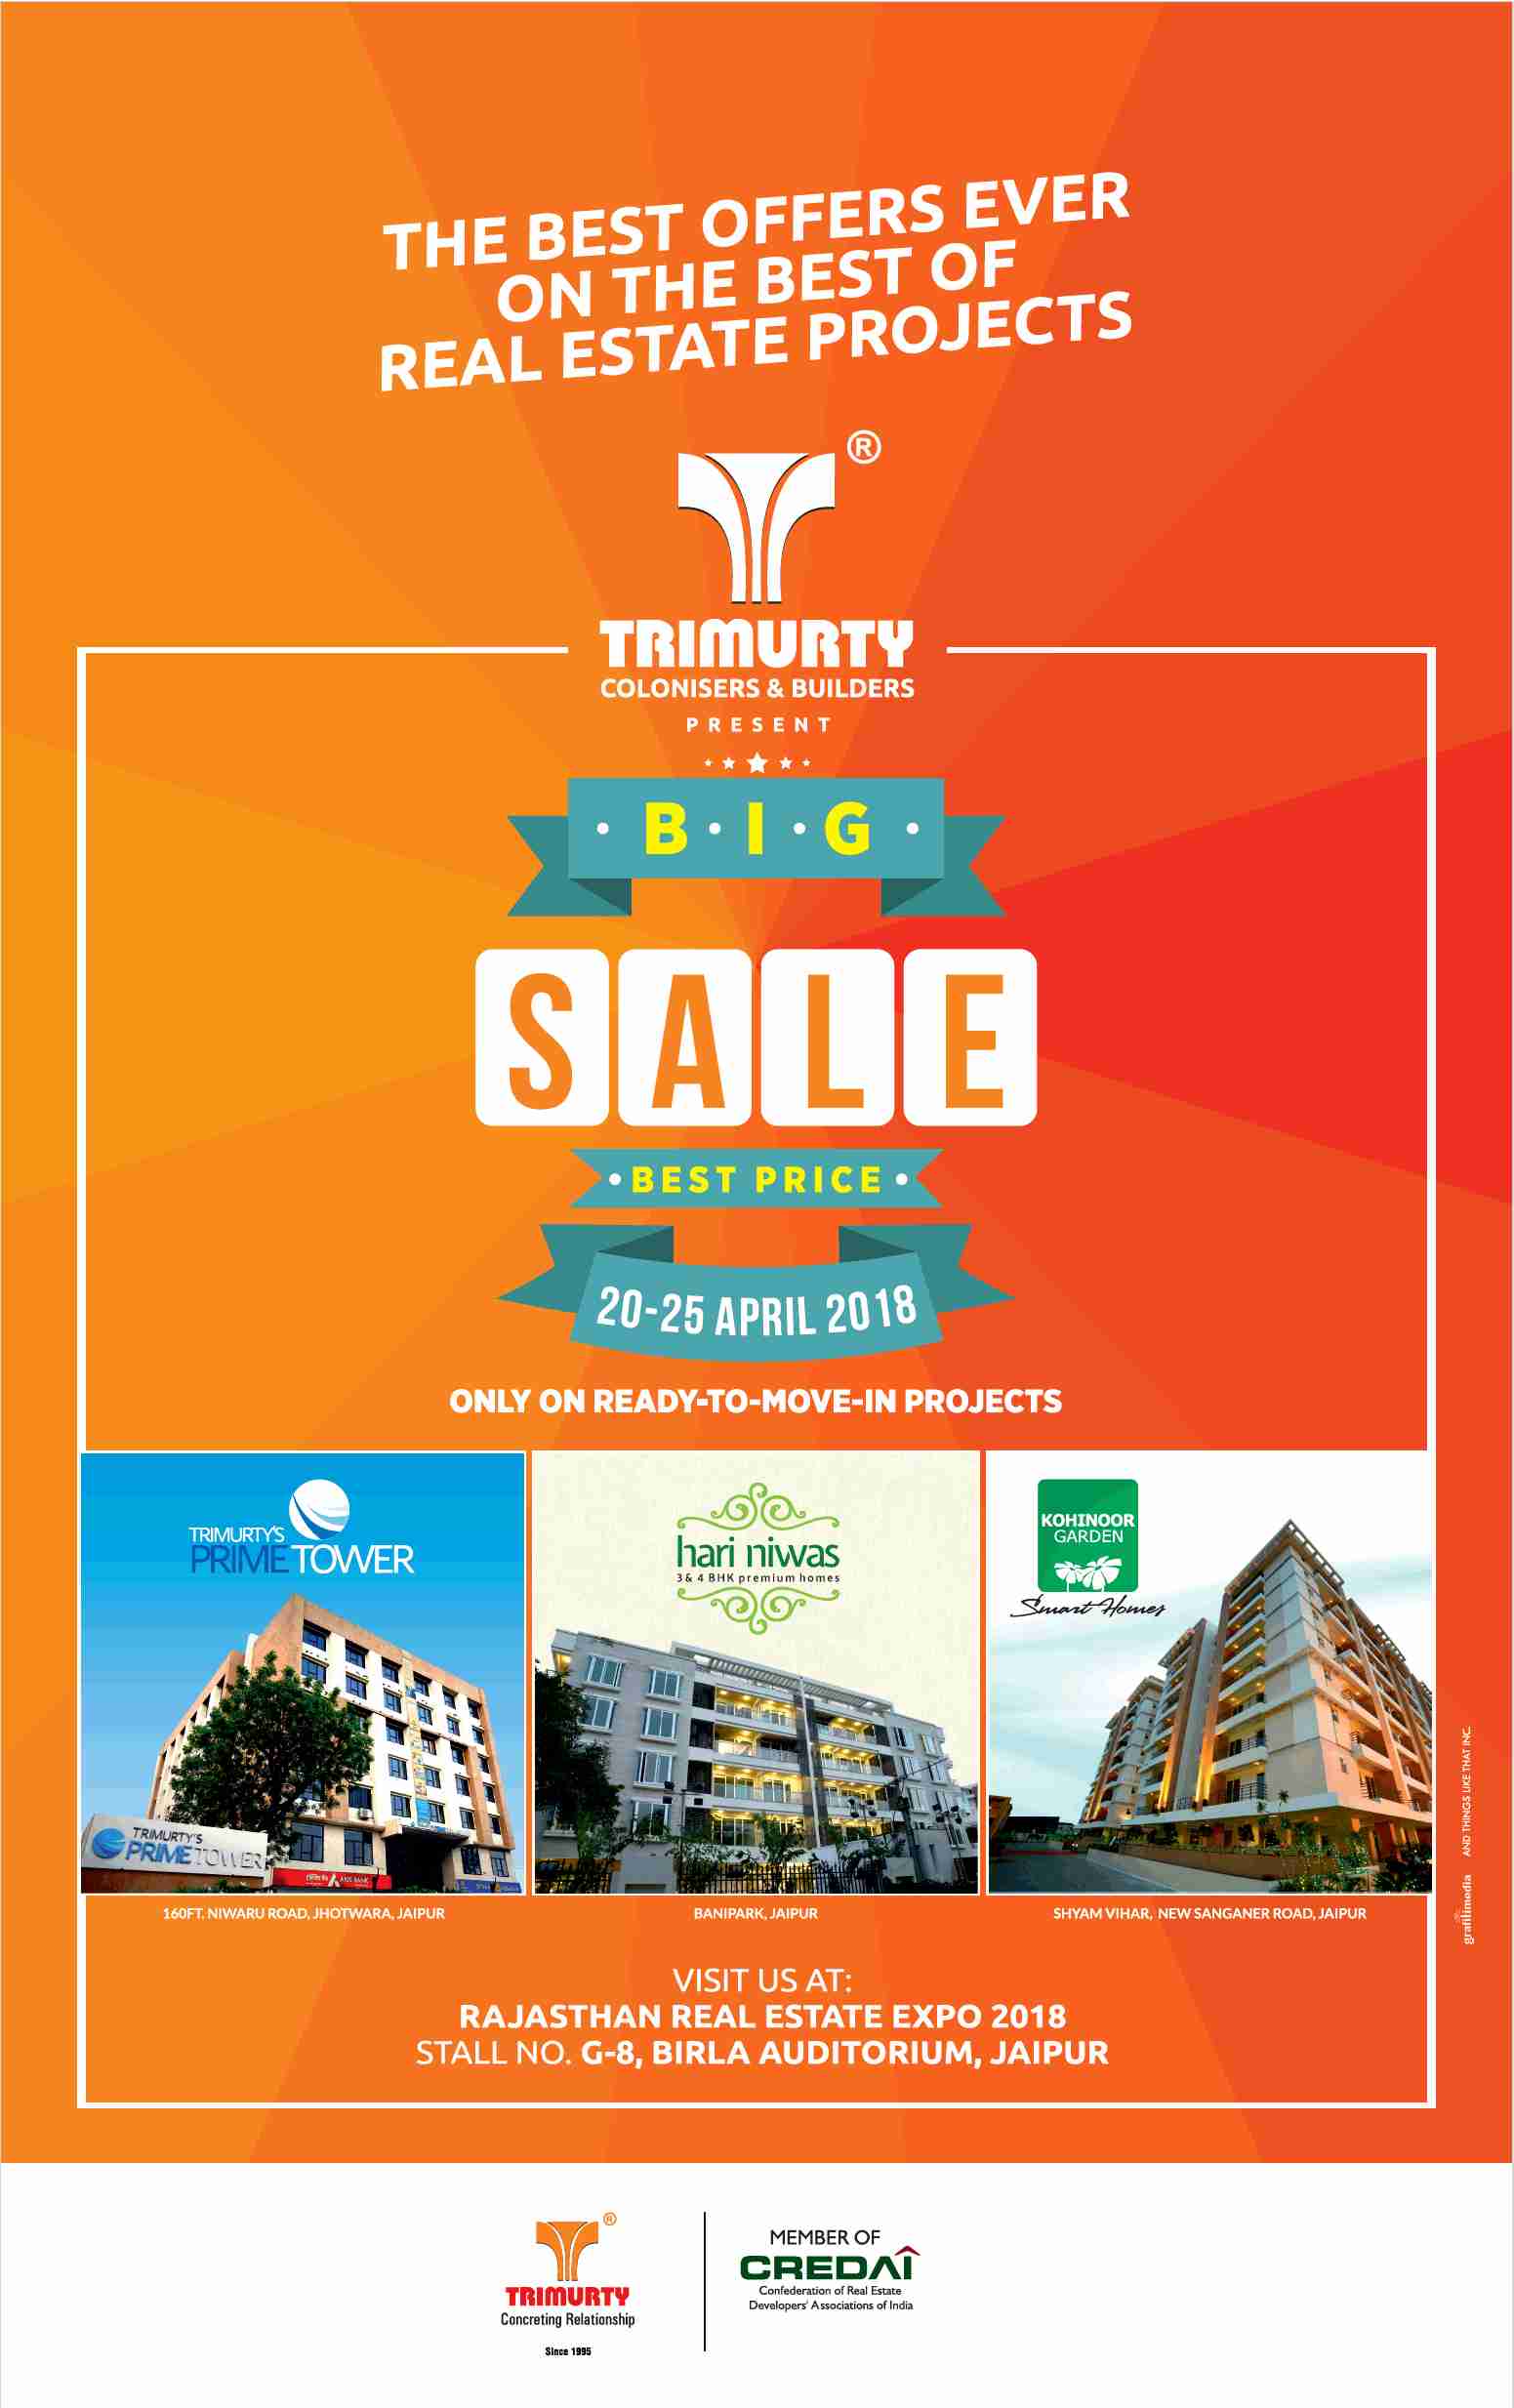 Trimurty Colonzers & Builders presents Big Sale with Best Price on ready to  move projects in Jaipur